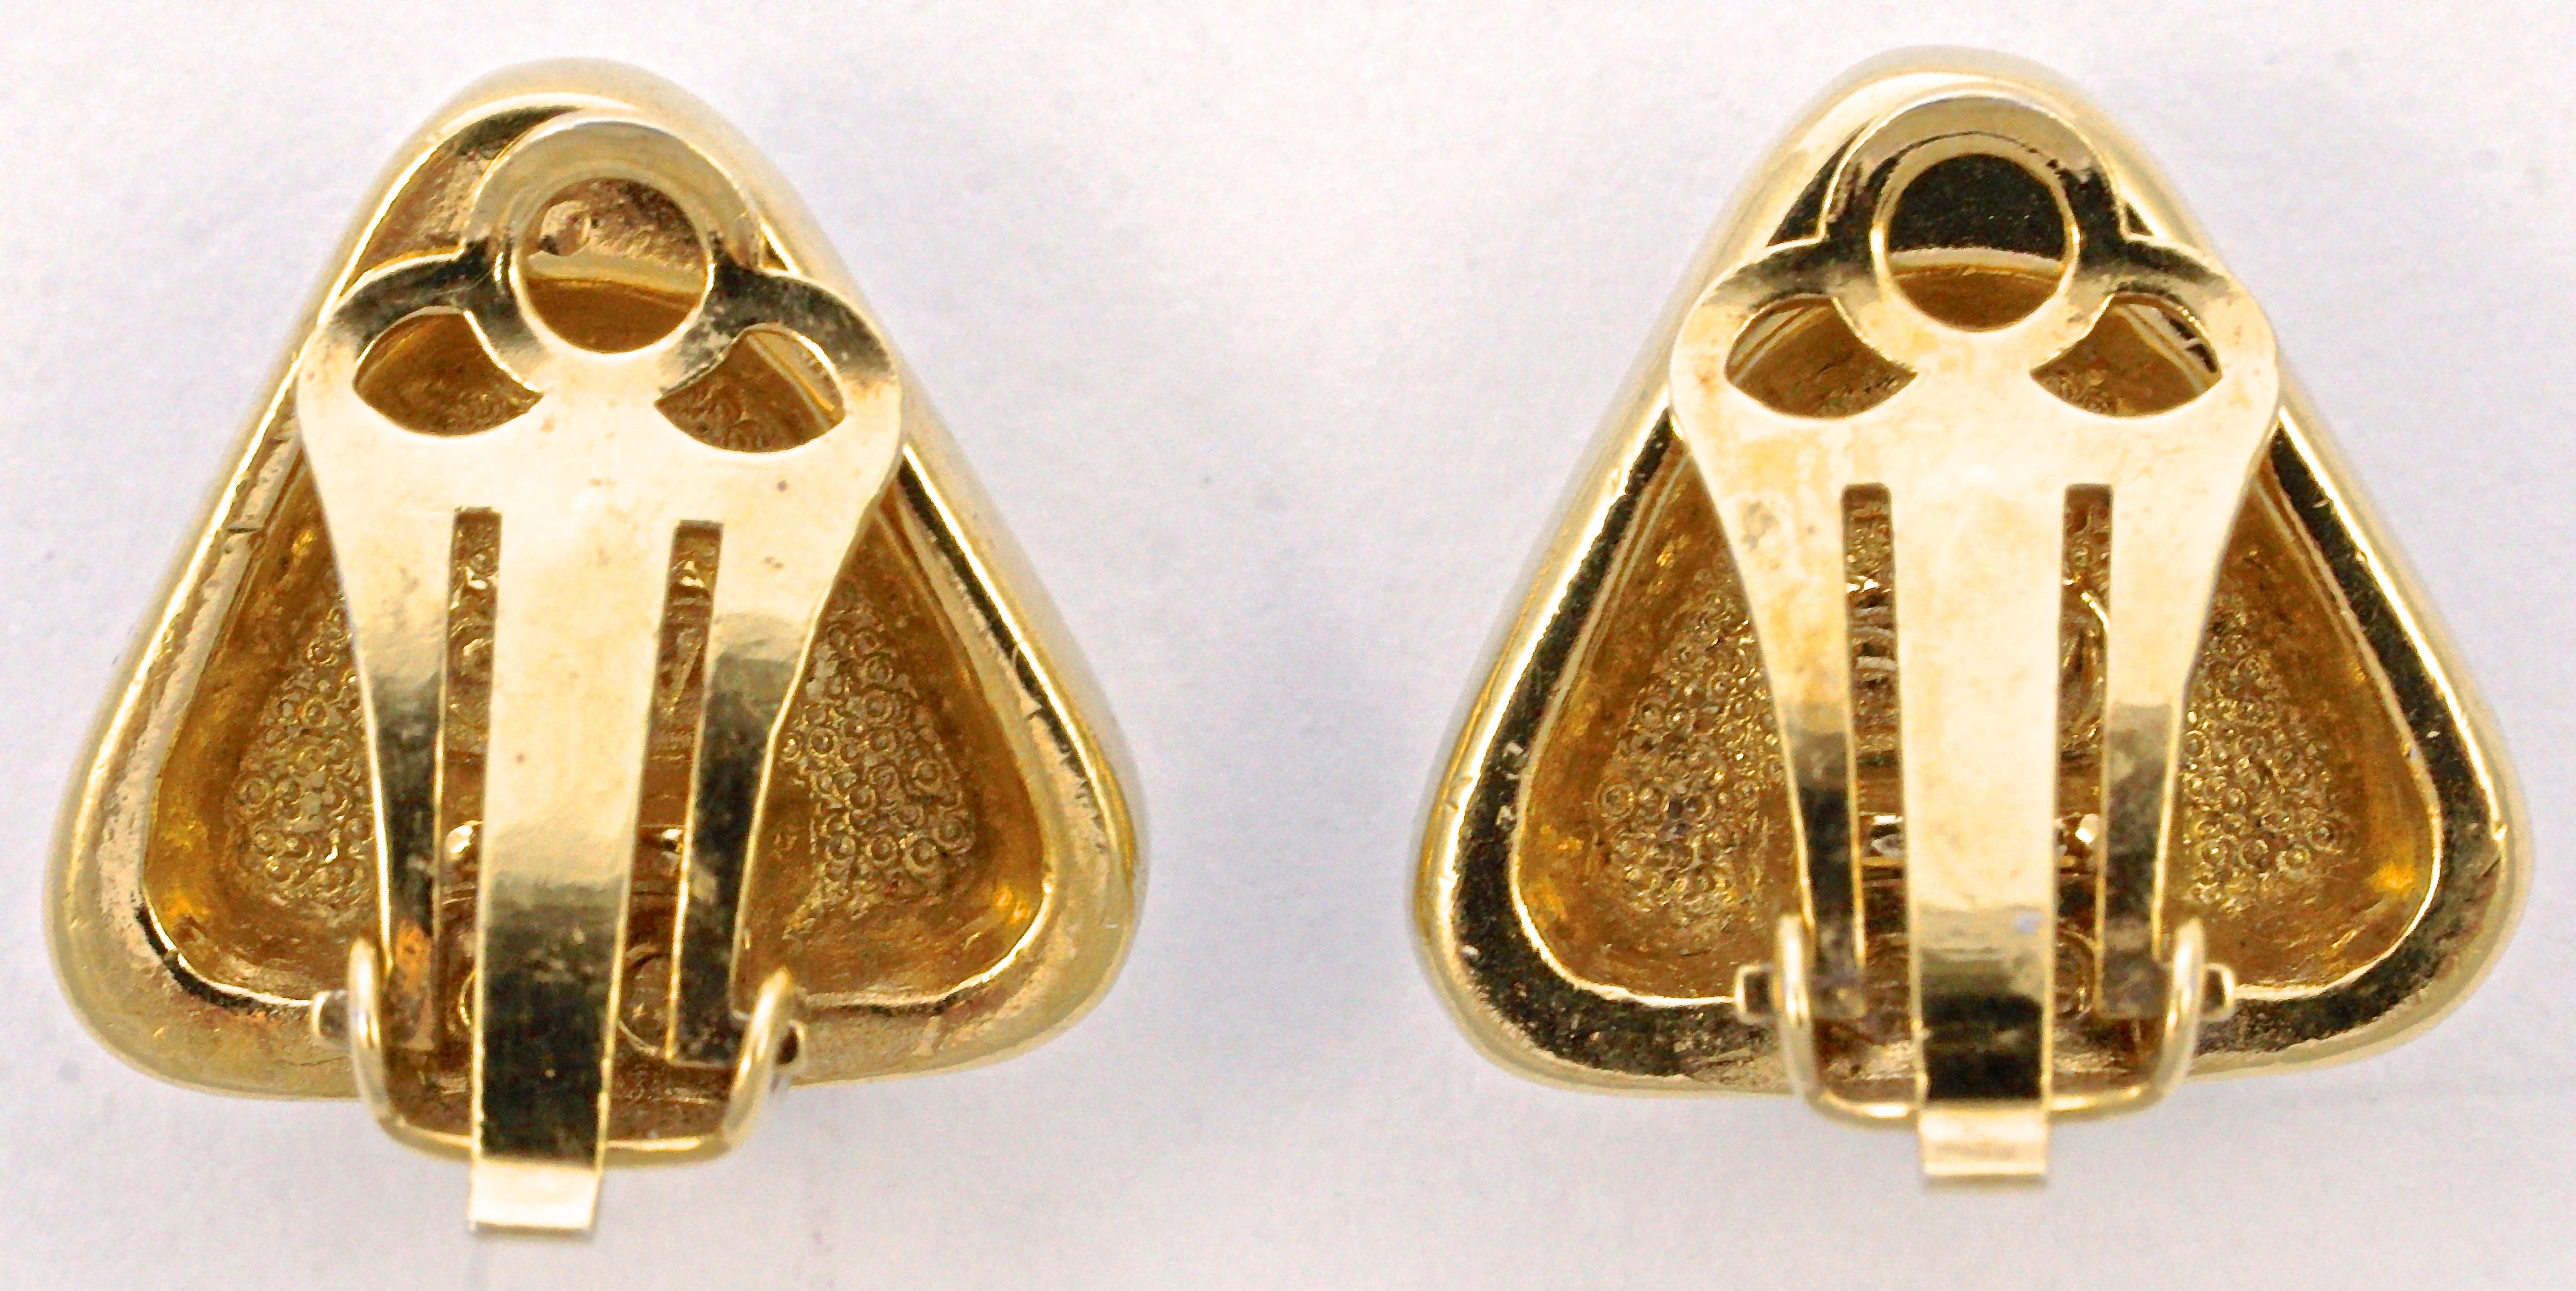 Attwood & Sawyer lovely gold plated triangle earrings embellished with small clear rhinestones surrounding a central large triangular rhinestone. They are clip ons and measure 1.55cm / .61 inch on each side.

These beautiful vintage Attwood & Sawyer